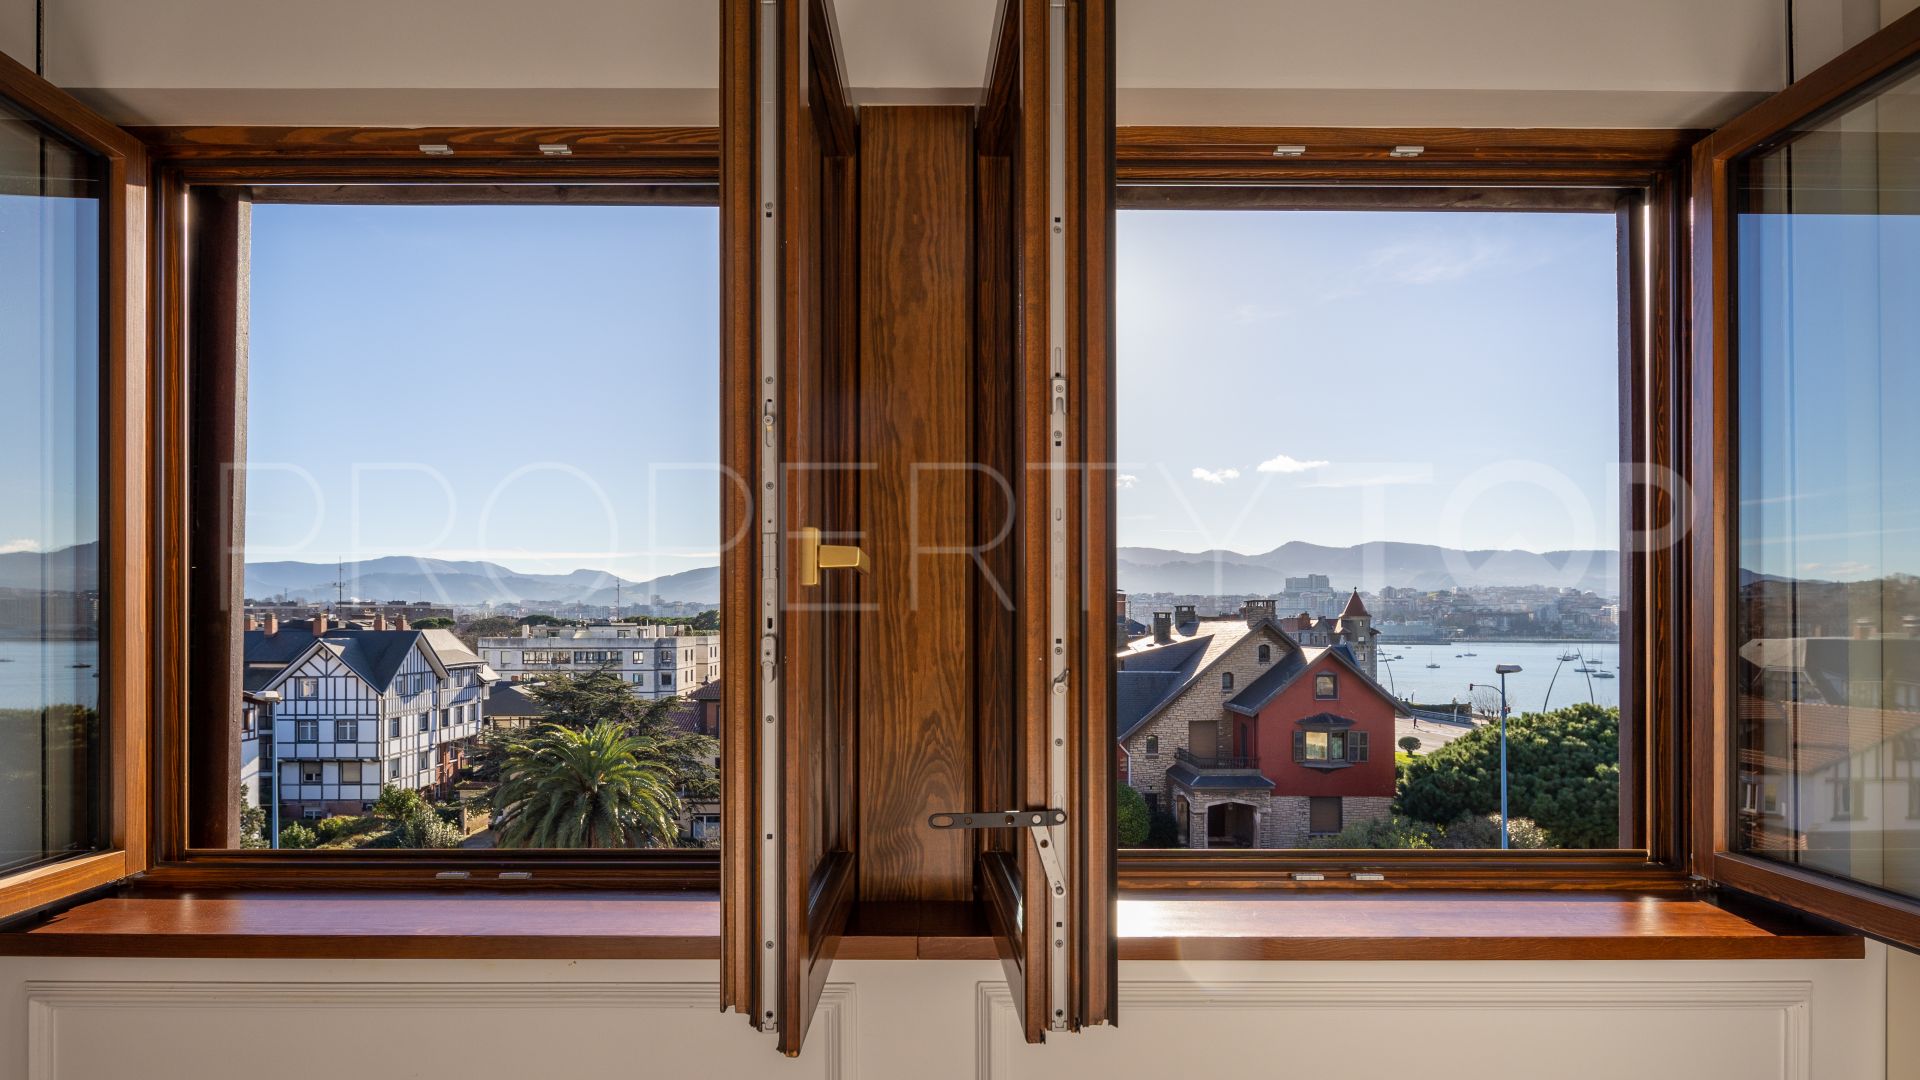 6 bedrooms Bilbao penthouse for sale